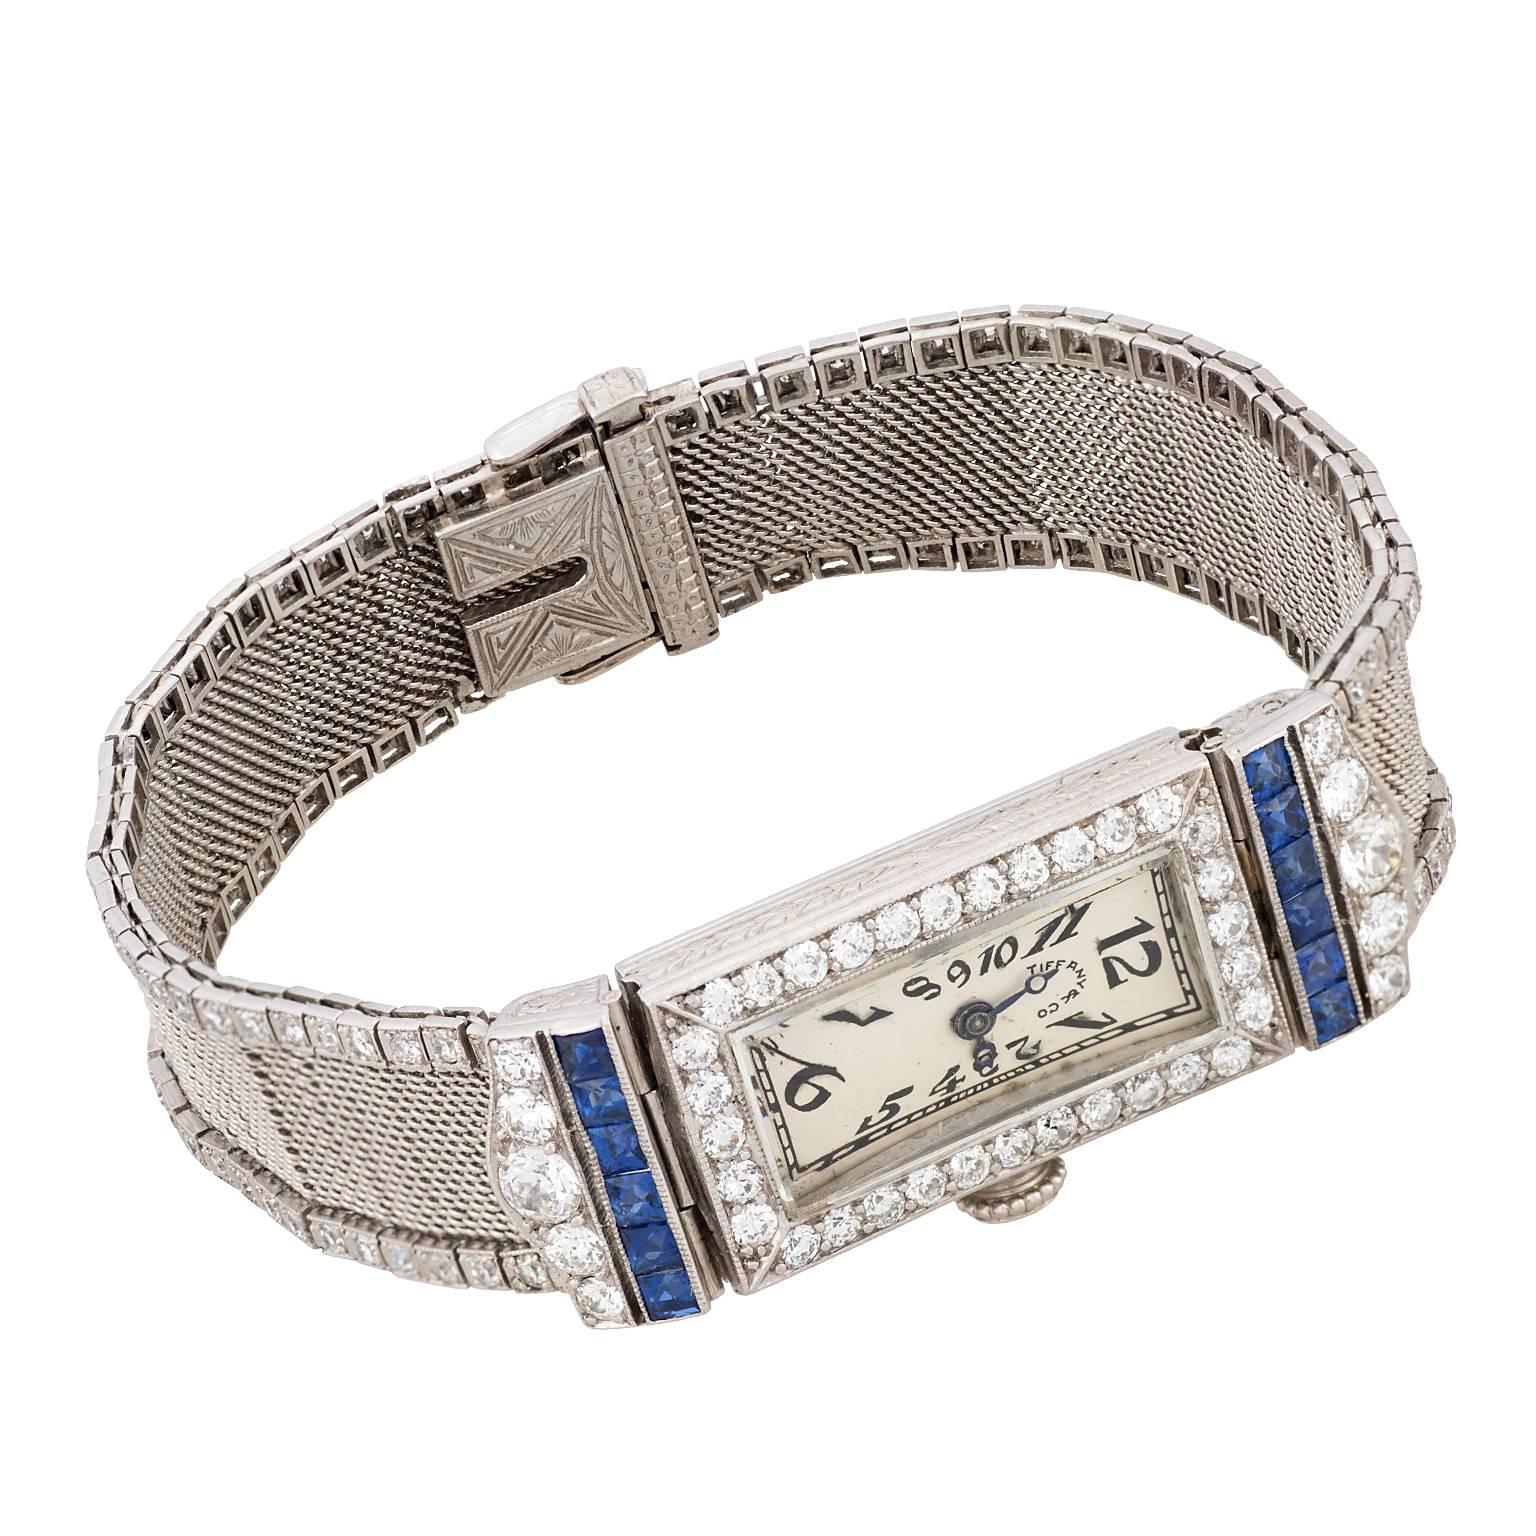 An Art Deco Tiffany & Co. diamond and sapphire platinum watch.  The watch has a beautiful hand engraved platinum case, encrusted with diamonds and sapphires, and a mesh platinum bracelet lined on both sides with diamonds.  The watch contains a